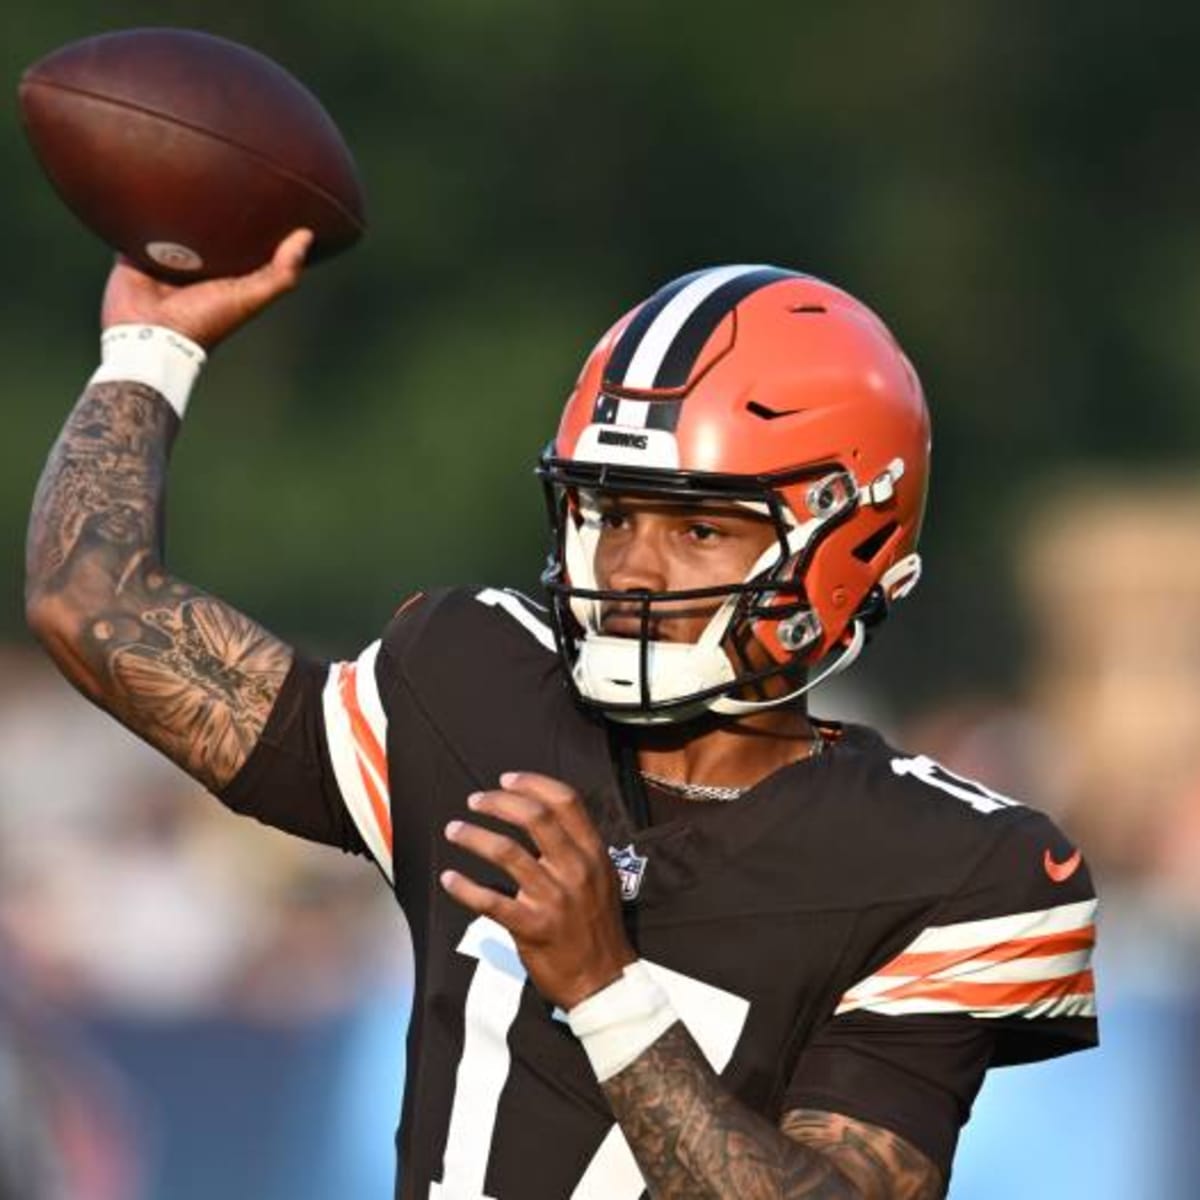 Deshaun Watson Injured, Rookie QB Dorian Thompson-Robinson to Start for  Browns vs. Ravens - Visit NFL Draft on Sports Illustrated, the latest news  coverage, with rankings for NFL Draft prospects, College Football,